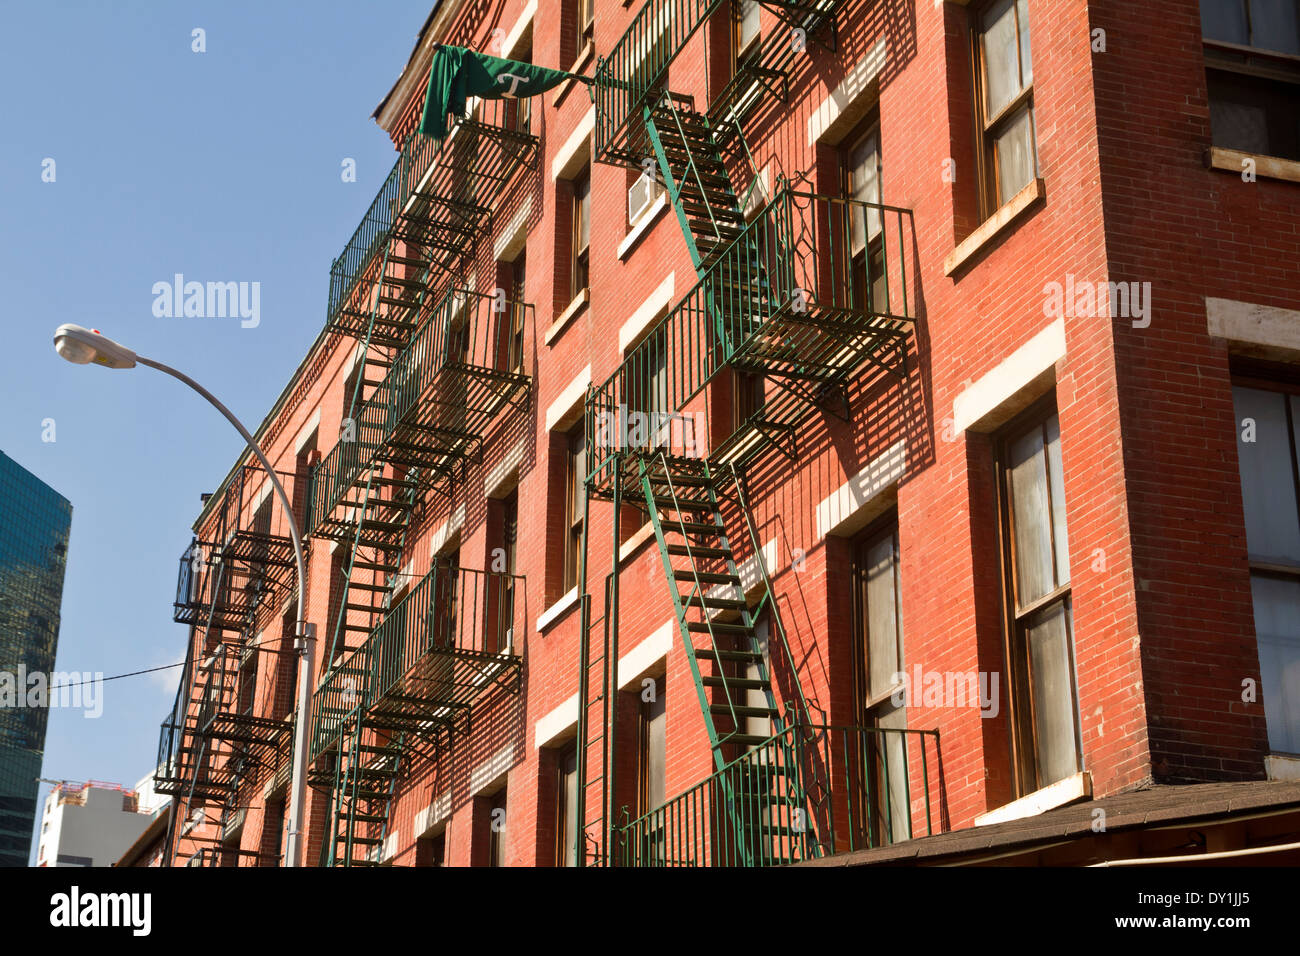 External Stairs In New York DY1JJ5 